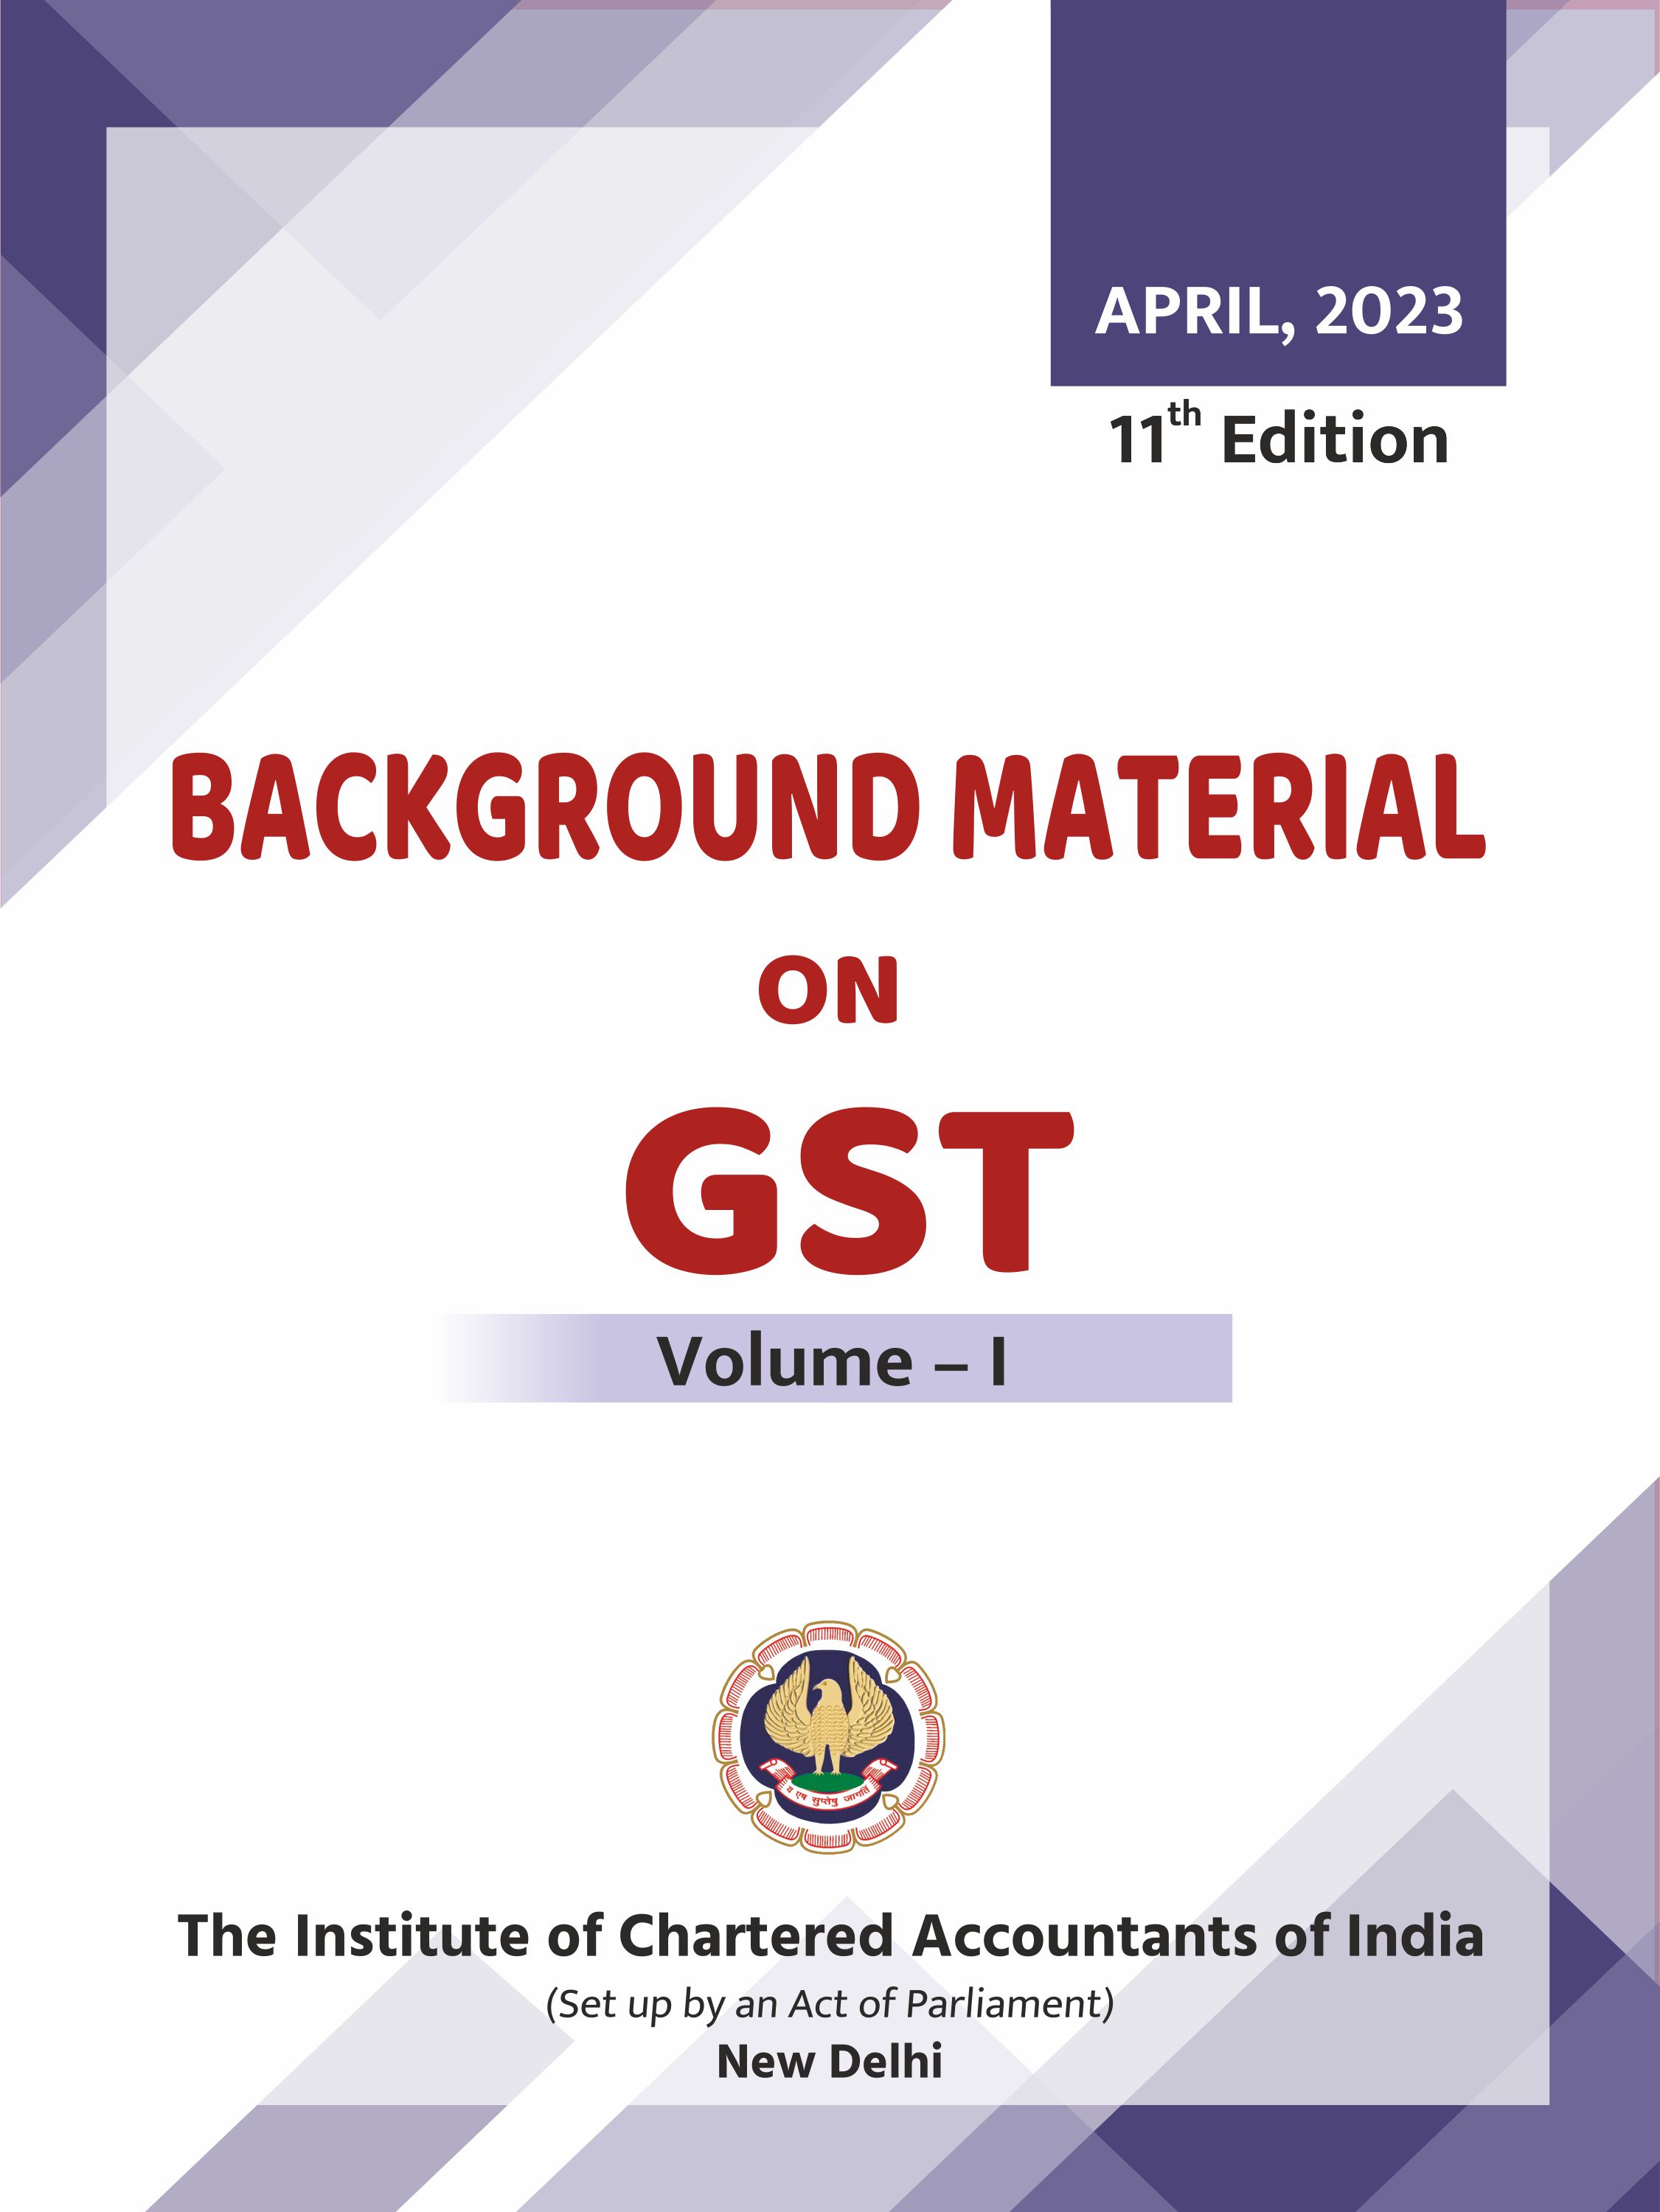 Background Material on GST - Volume - I & II - 11th Edition - April, 2023.